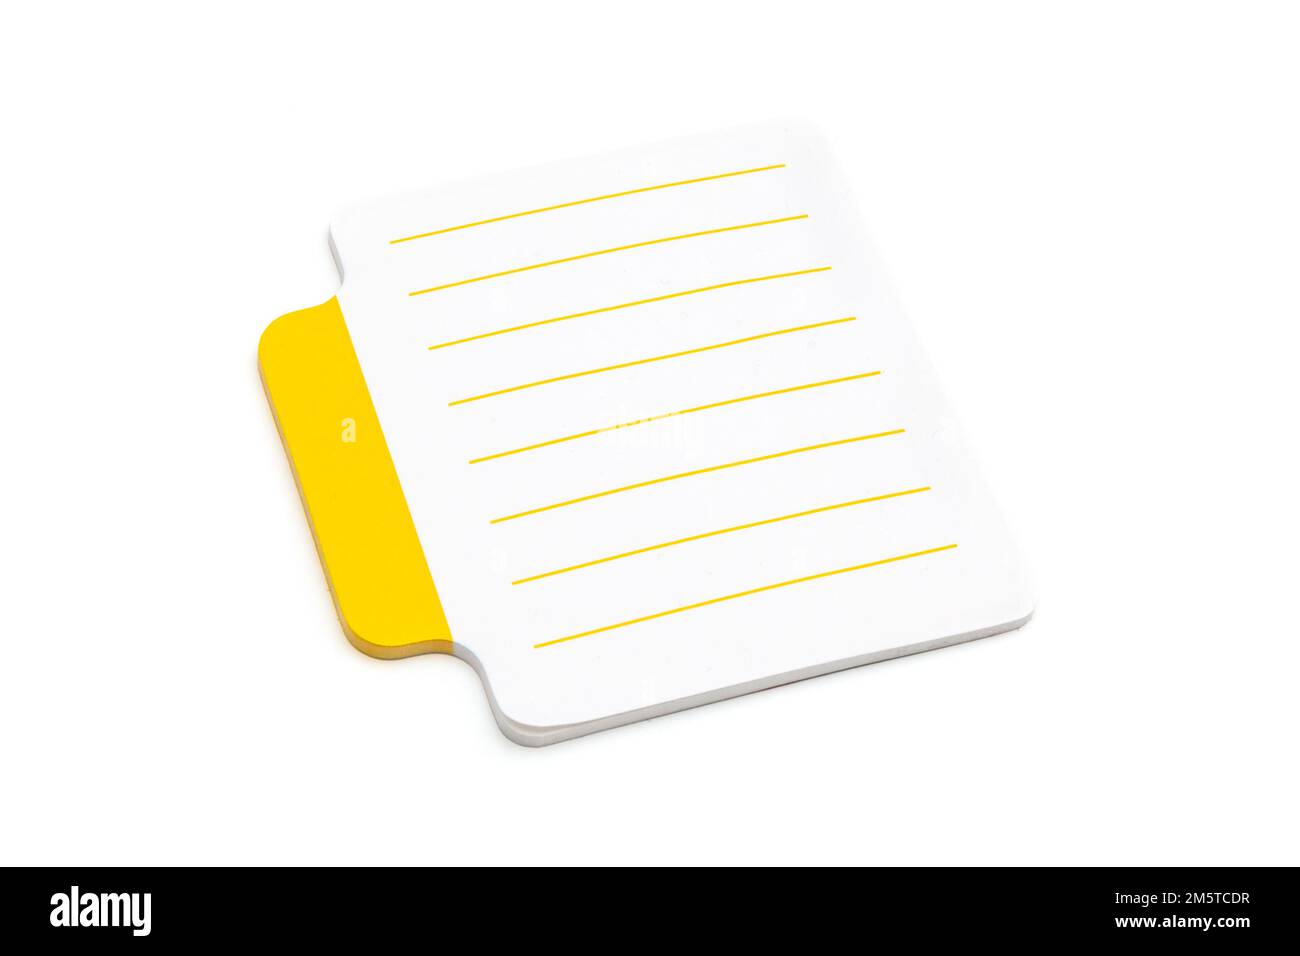 Blank small lined sticky notes with yellow tab on the left side of paper sheet, isolated on white background, closeup view Stock Photo